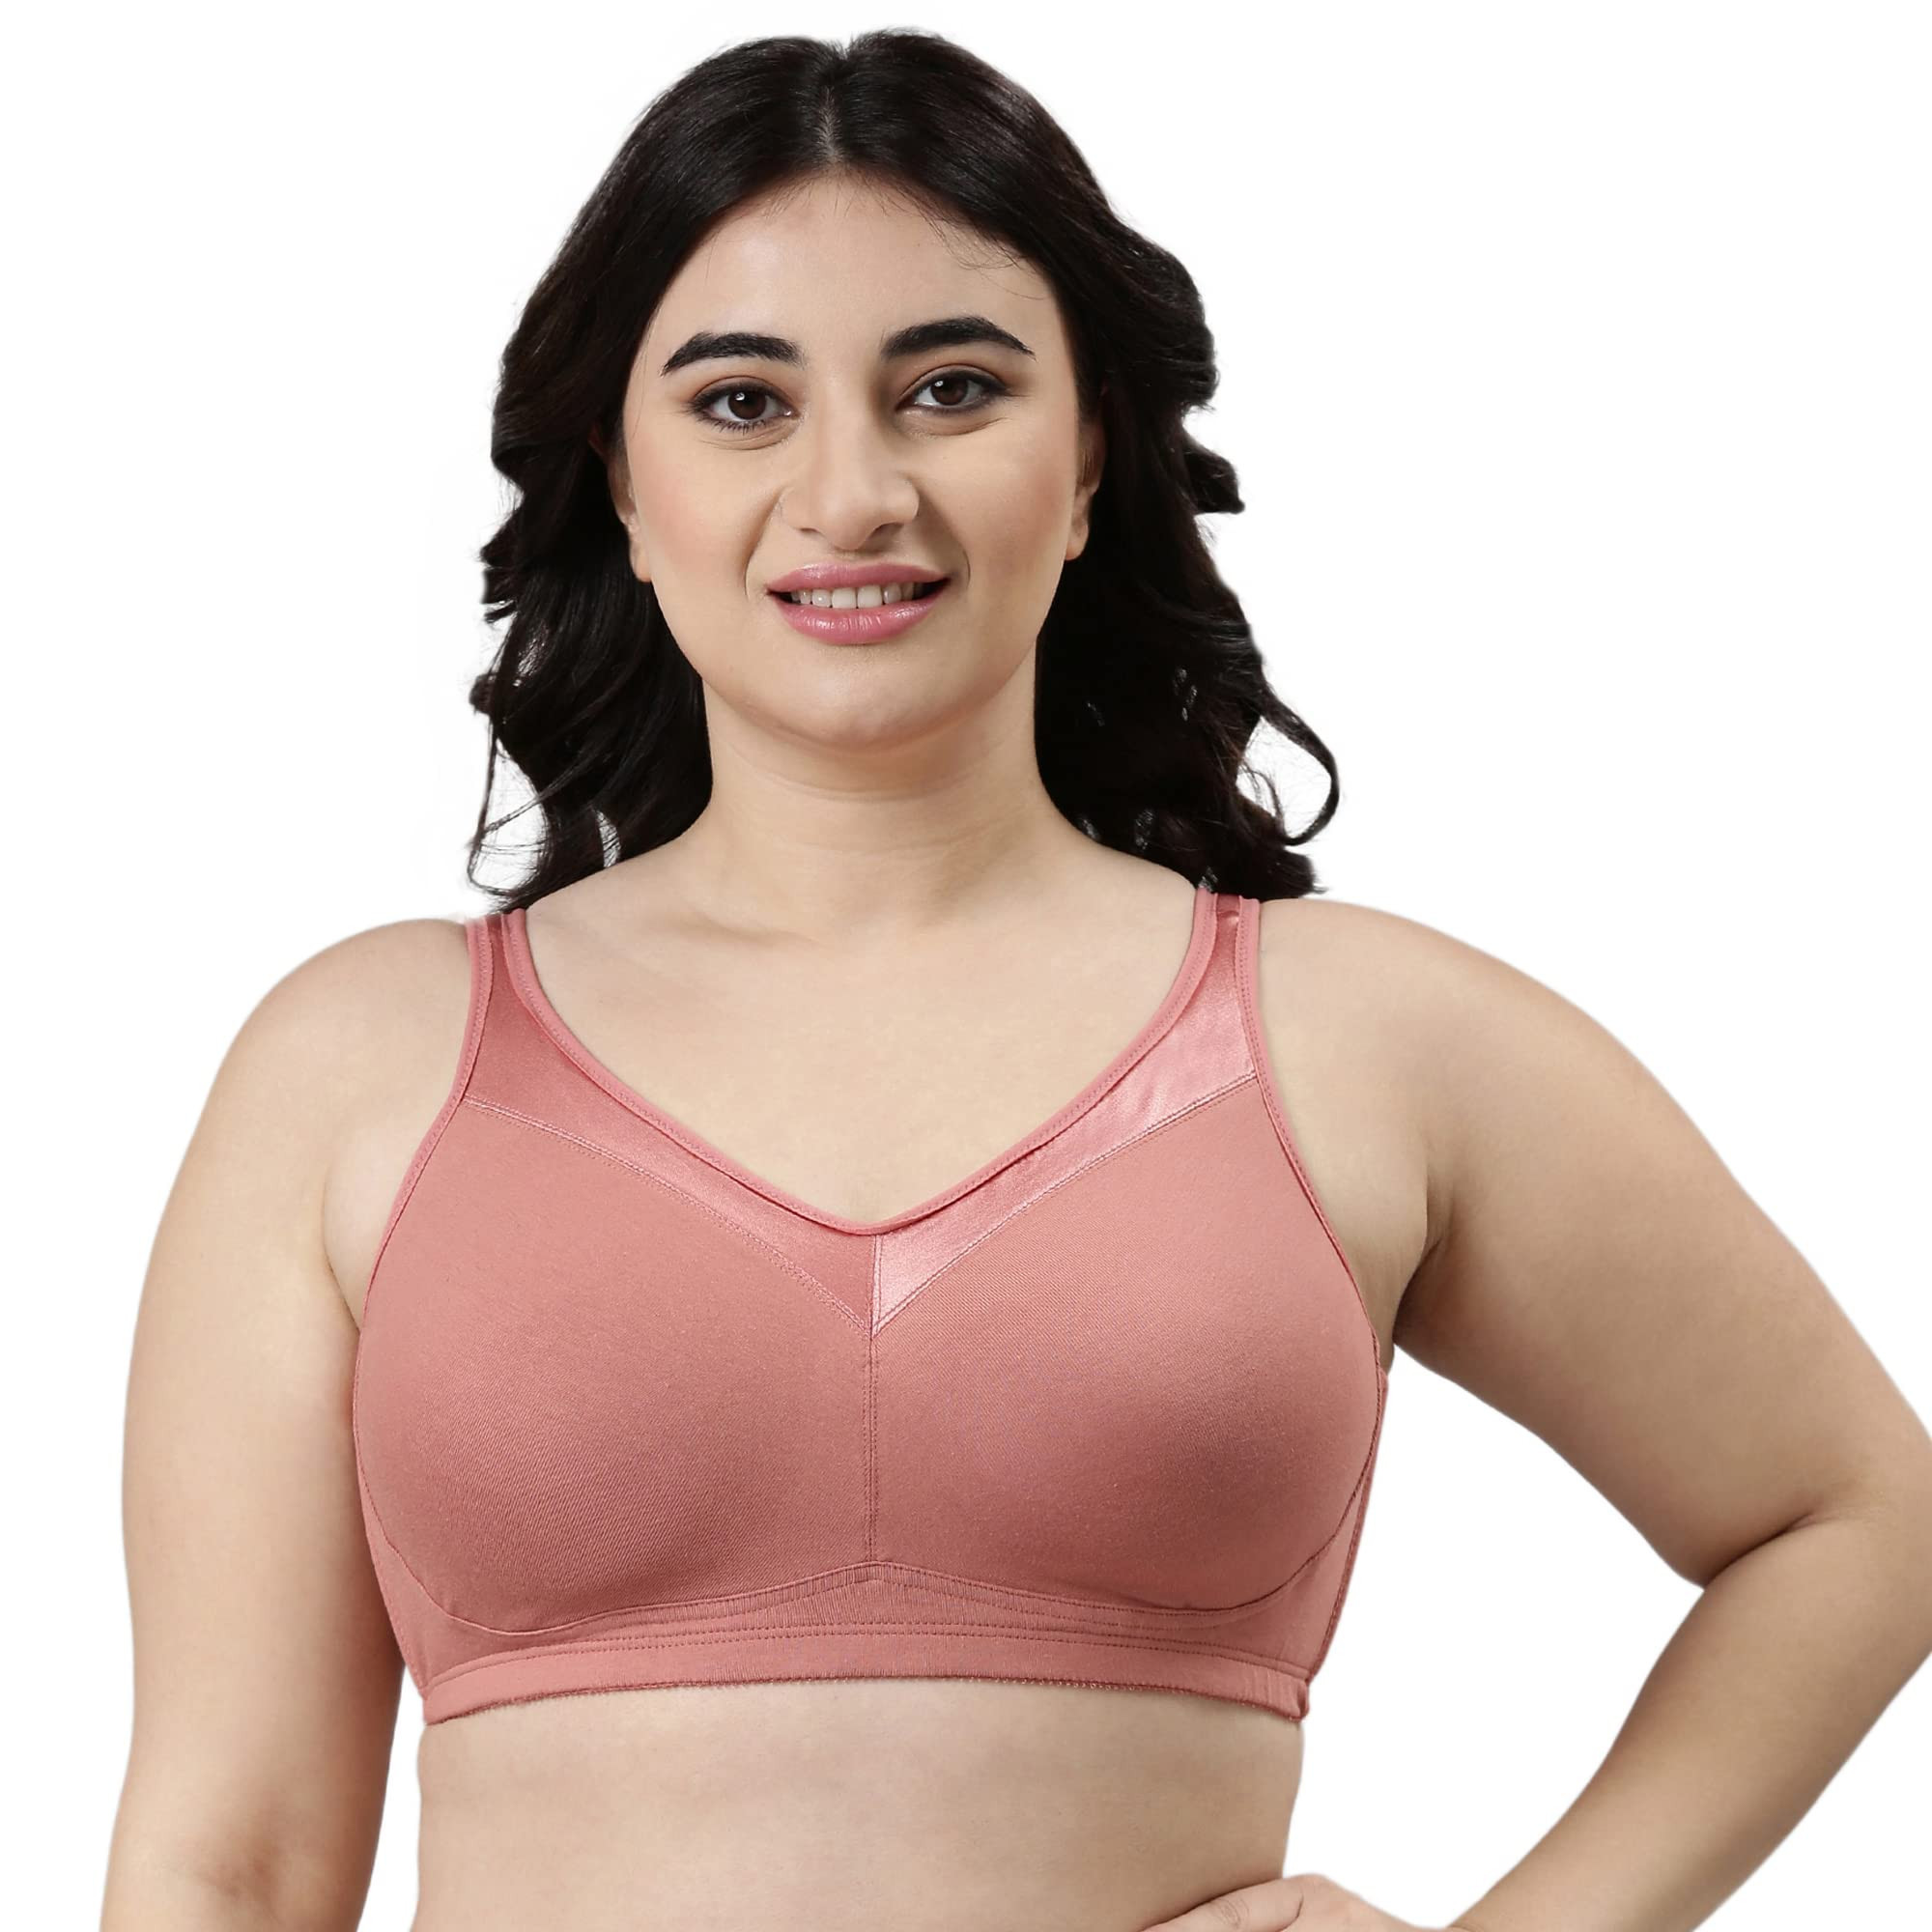 Enamor A112 Full Support Minimizer Cotton Bra For Women Non-Padded, Non- Wired & Full Coverage